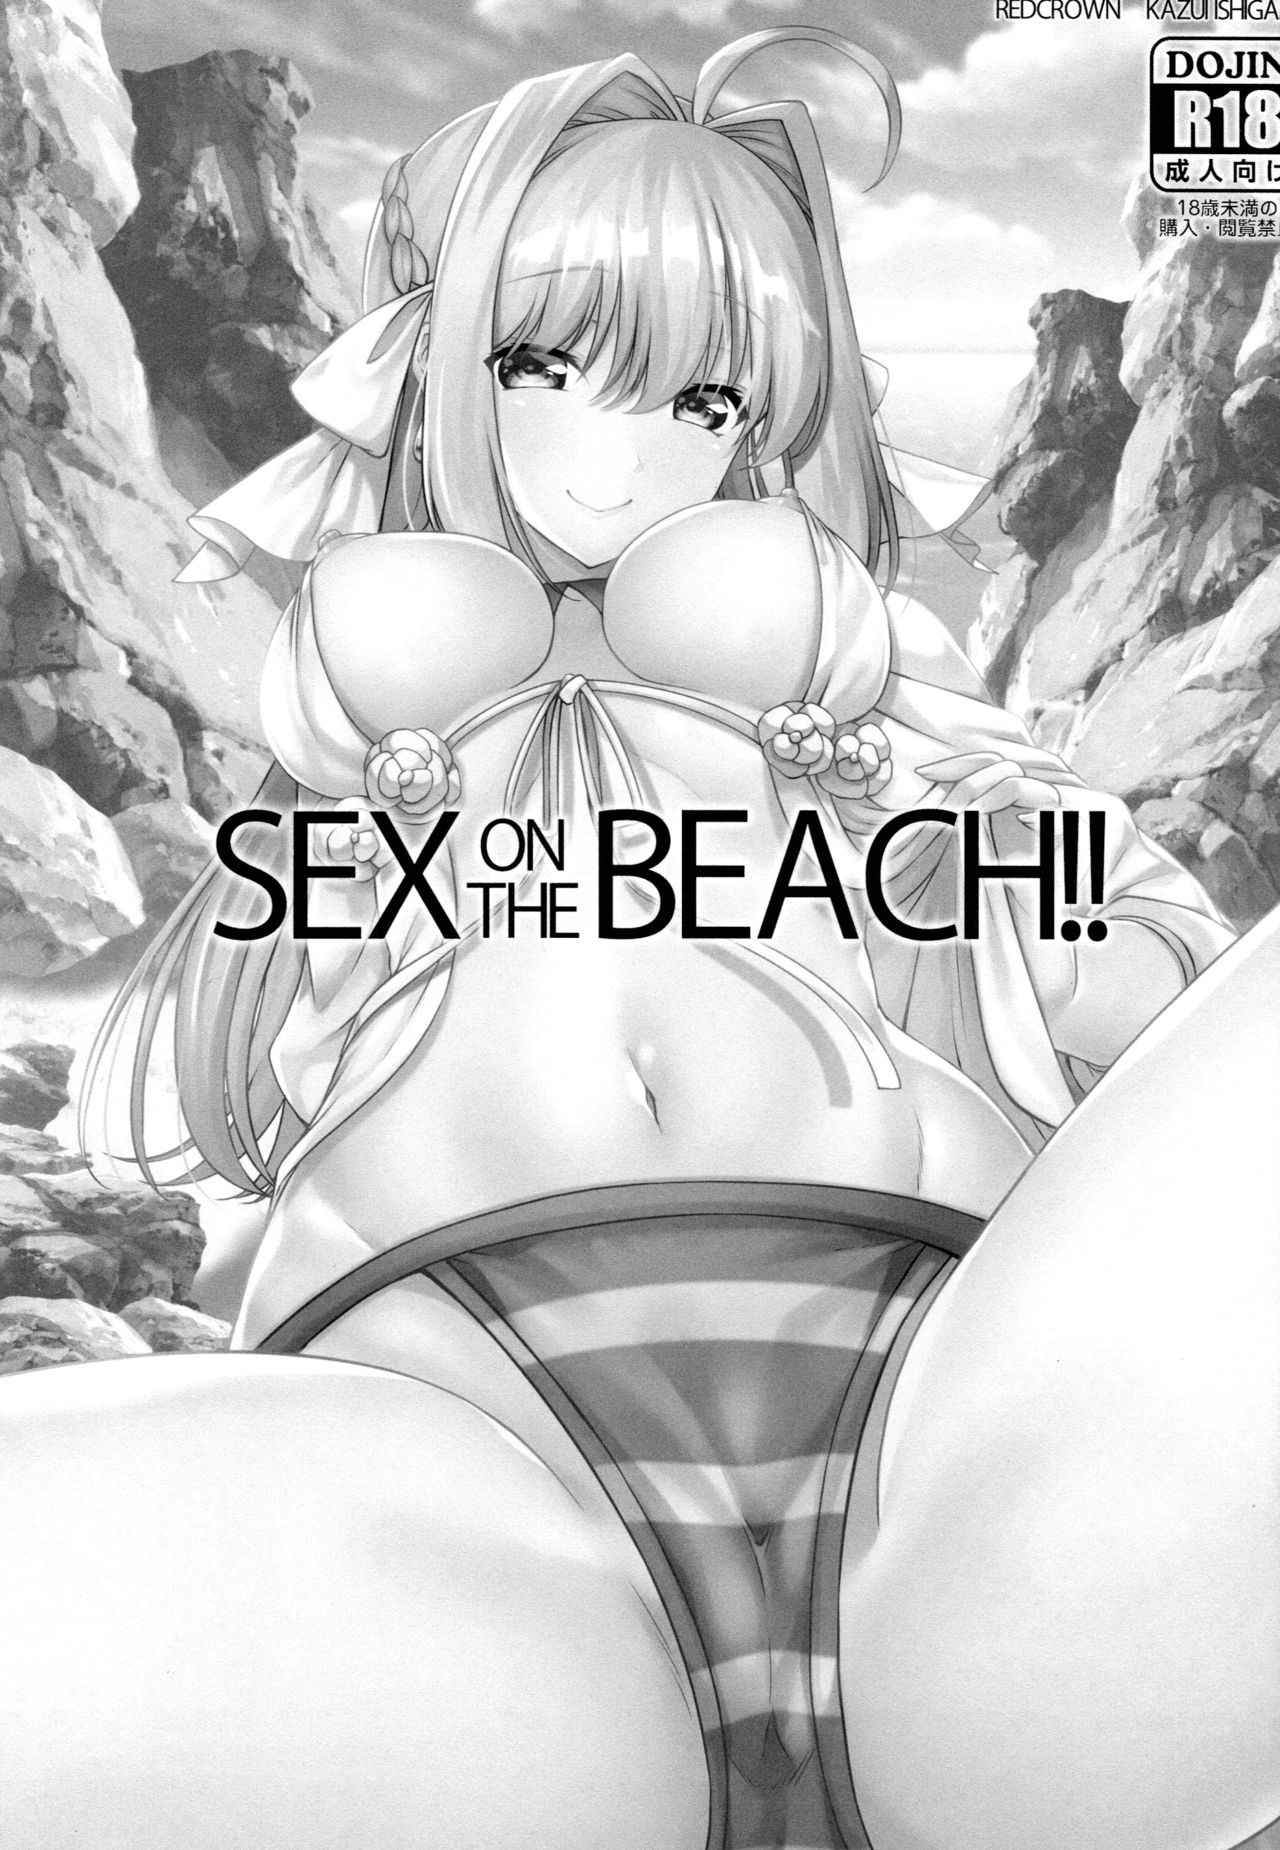 (C96) [RED CROWN (Ishigami Kazui)] SEX ON THE BEACH!! (Fate/Grand Order) [Chinese] [空気系☆漢化] page 3 full